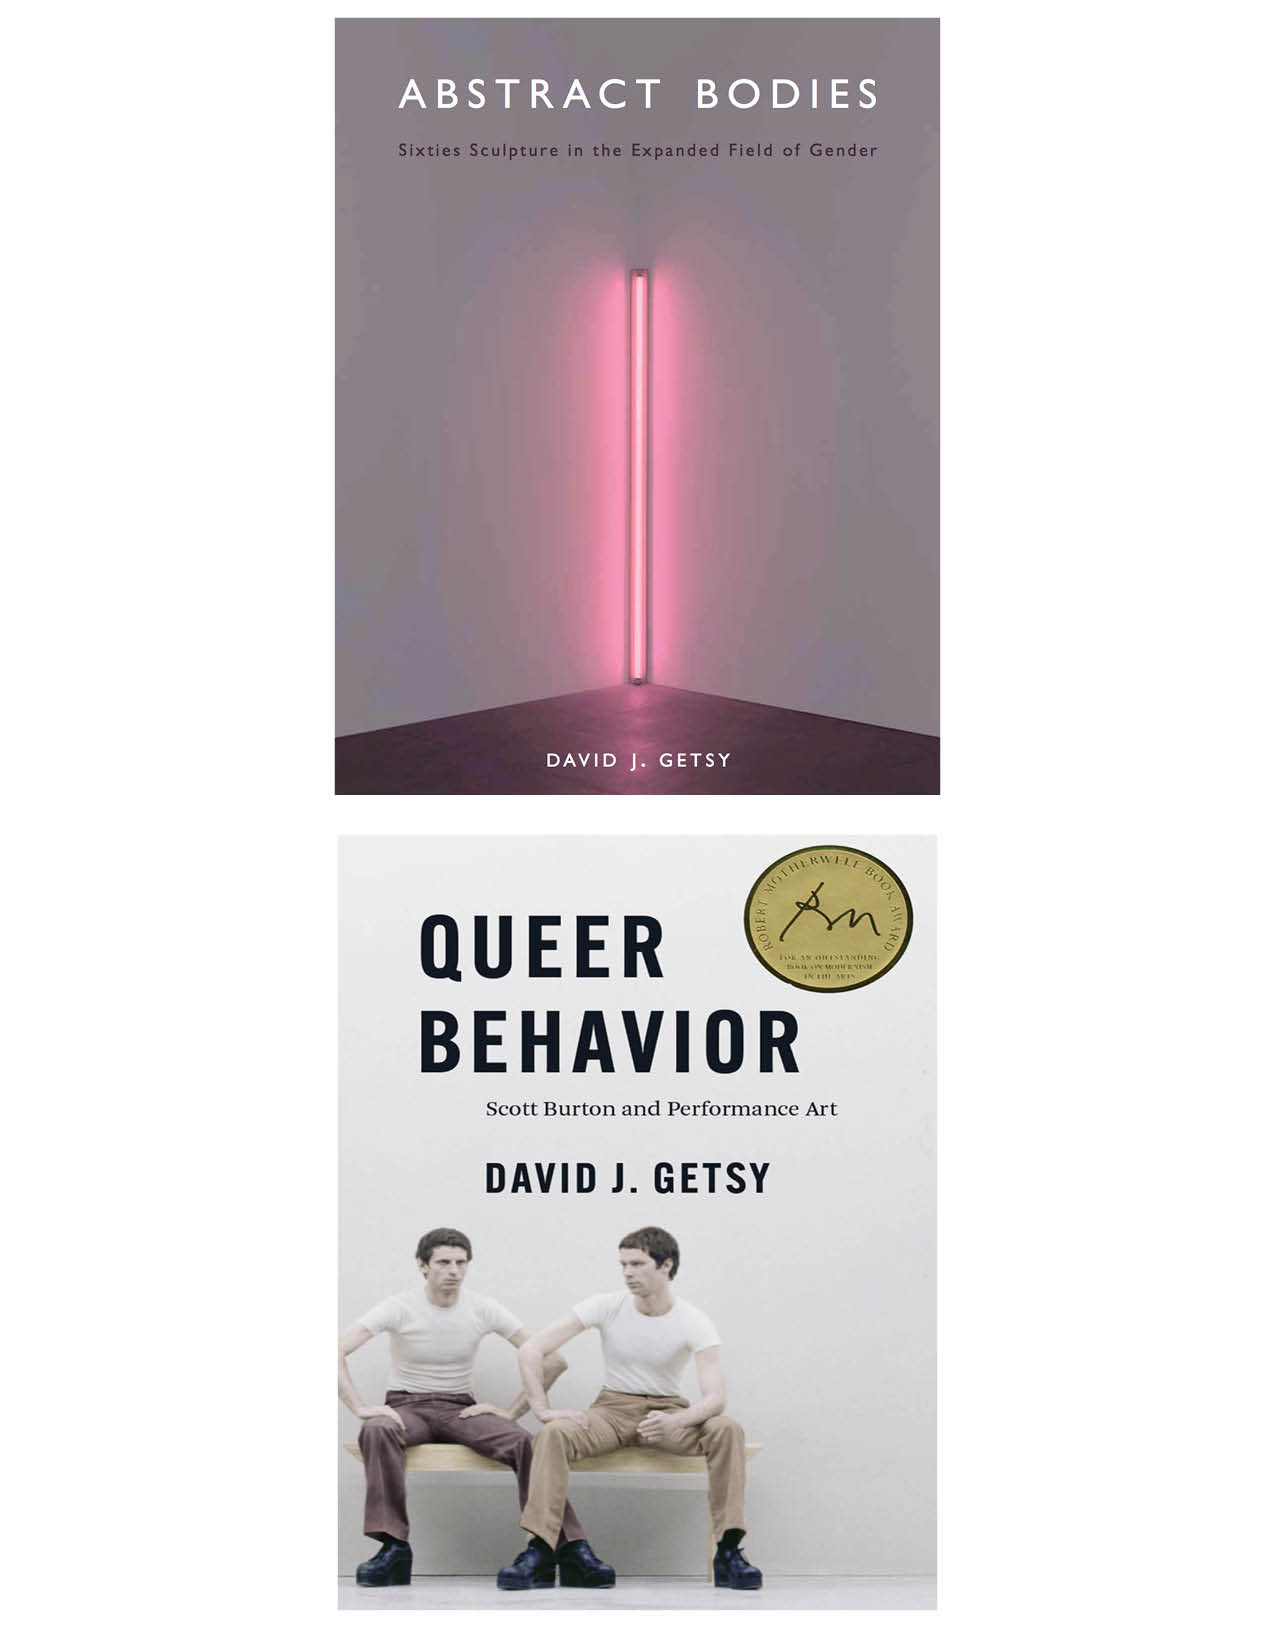 The covers of David Getsy's books "Abstract Bodies" and "Queer Behaviour"